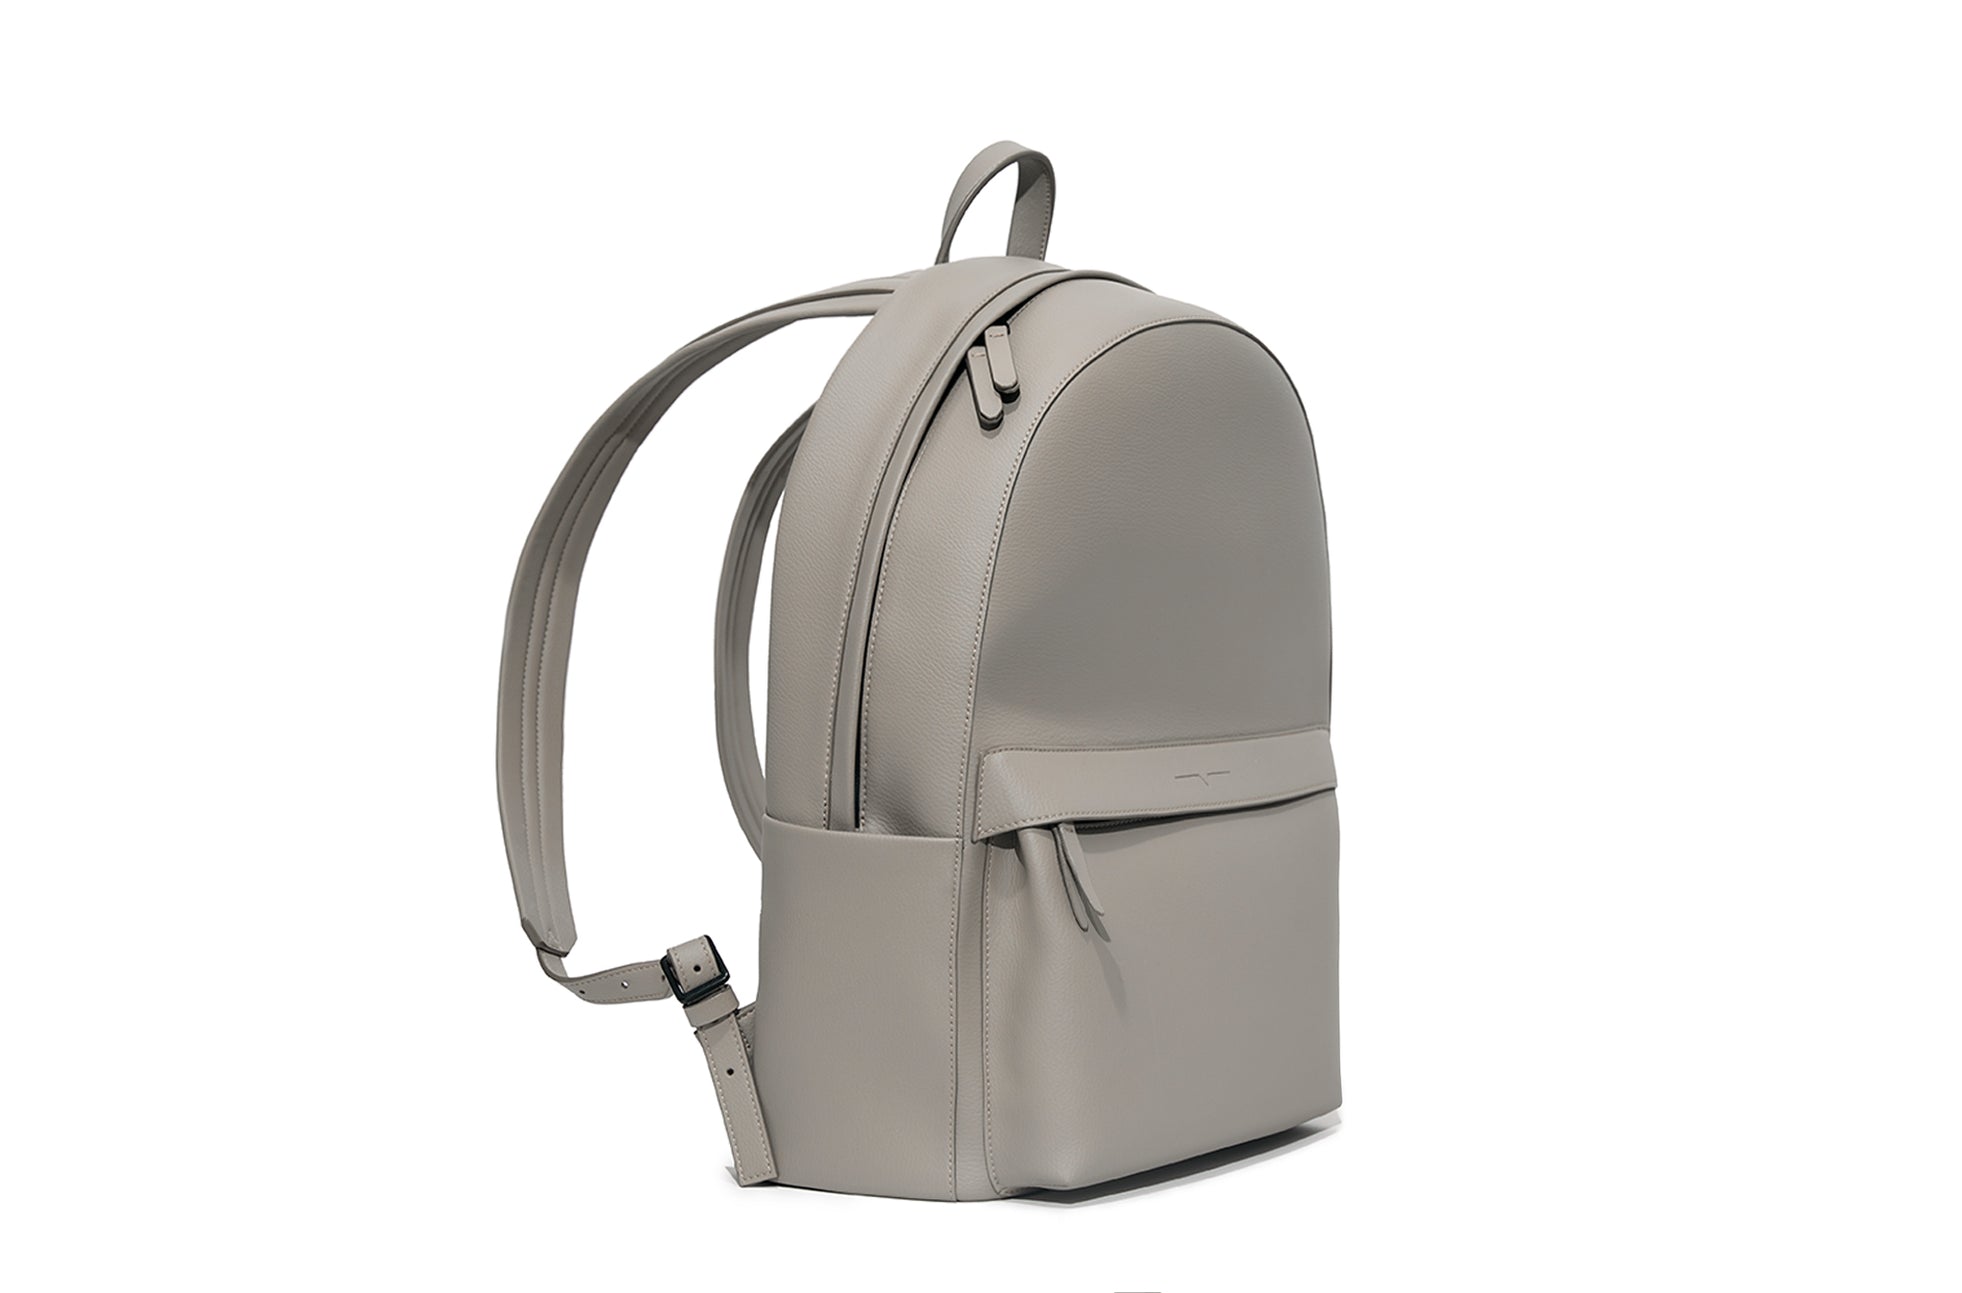 The Classic Backpack - Sample Sale in Technik in Stone image 5